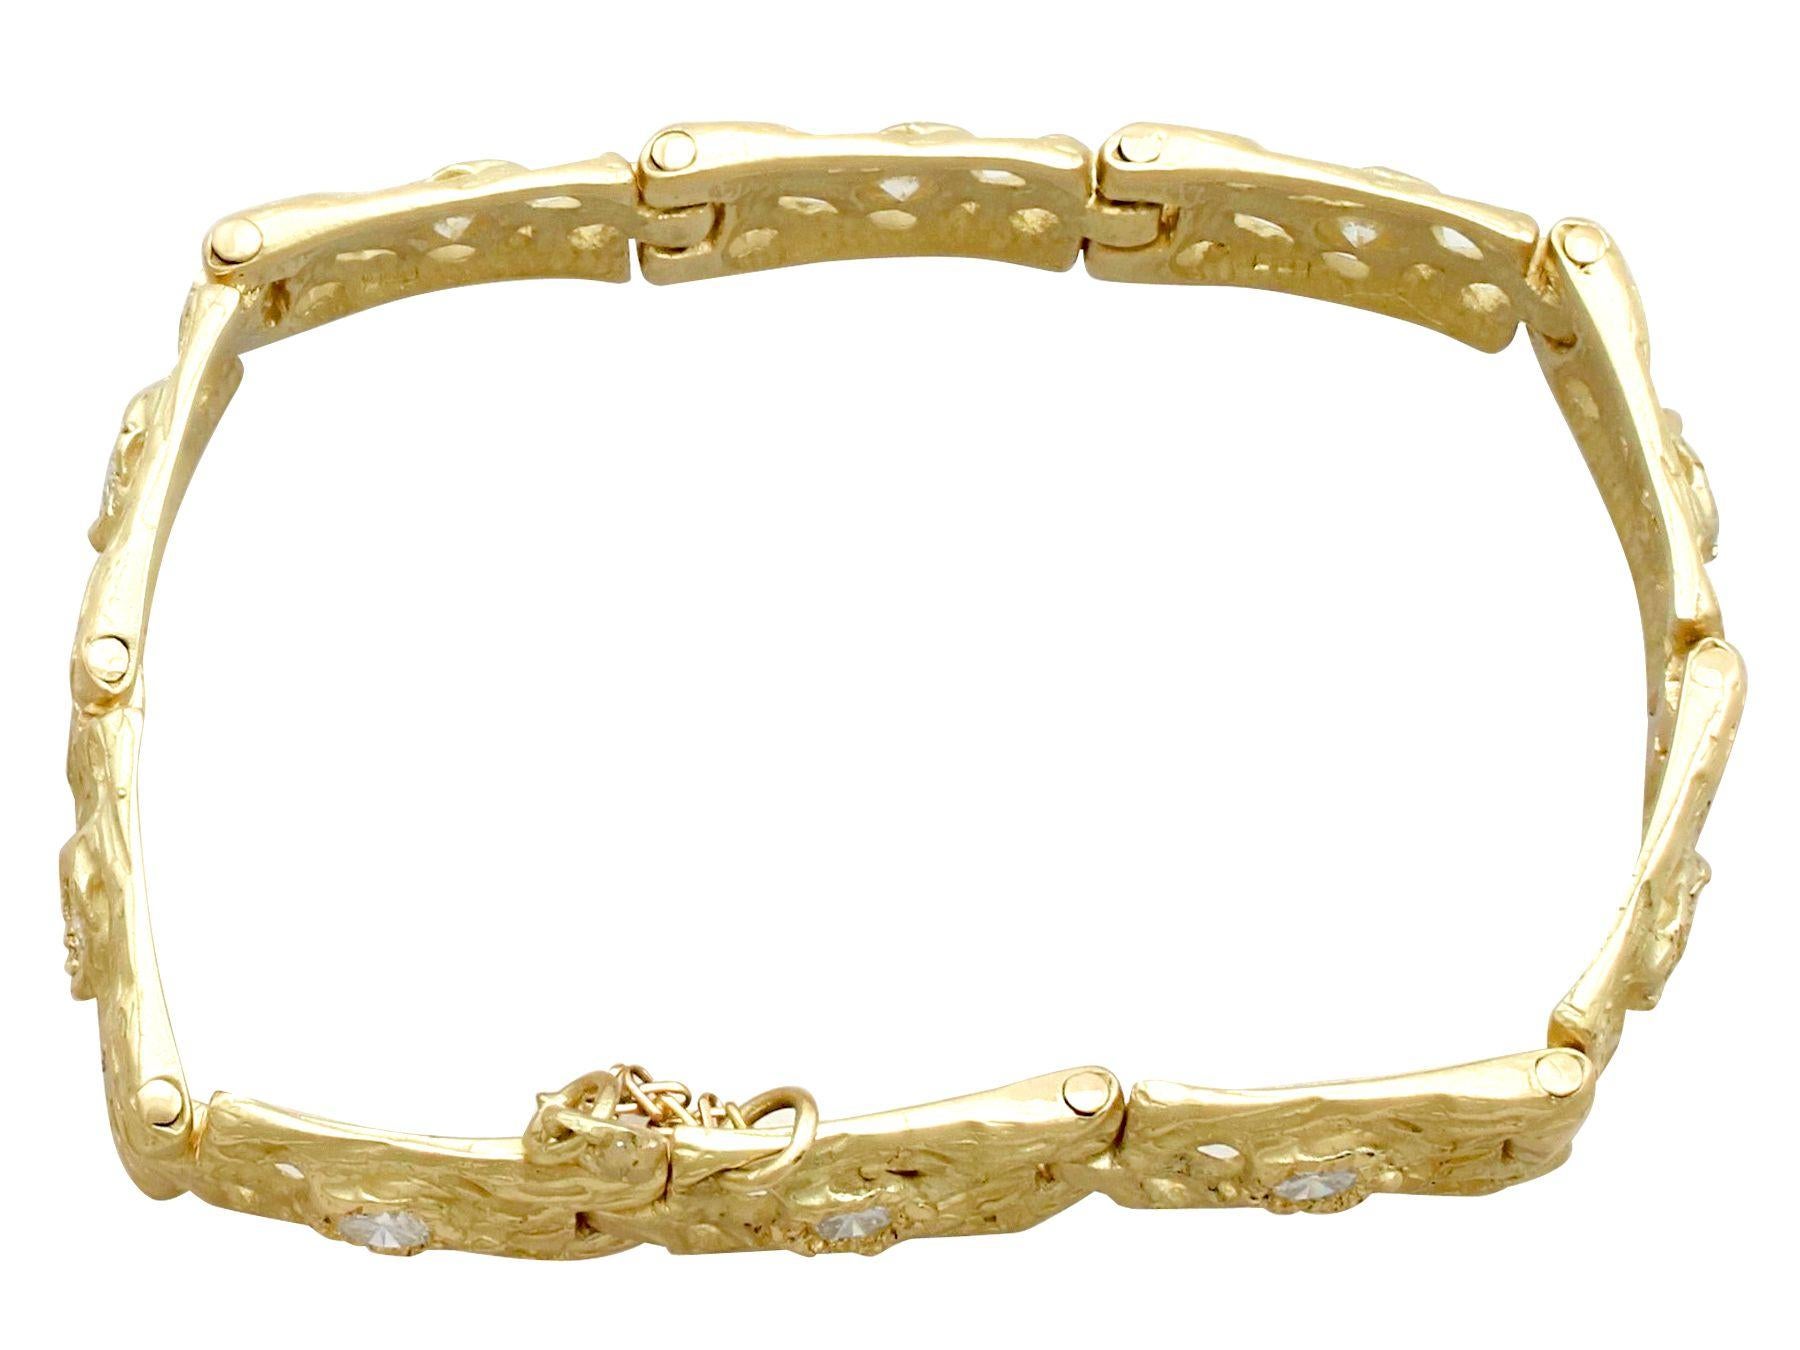 An impressive vintage 1990s 2.10 carat diamond and 18 karat yellow gold bracelet; part of our diverse diamond jewelry and estate jewelry collections.

This fine and impressive gold and diamond bracelet has been crafted in 18k yellow gold.

The